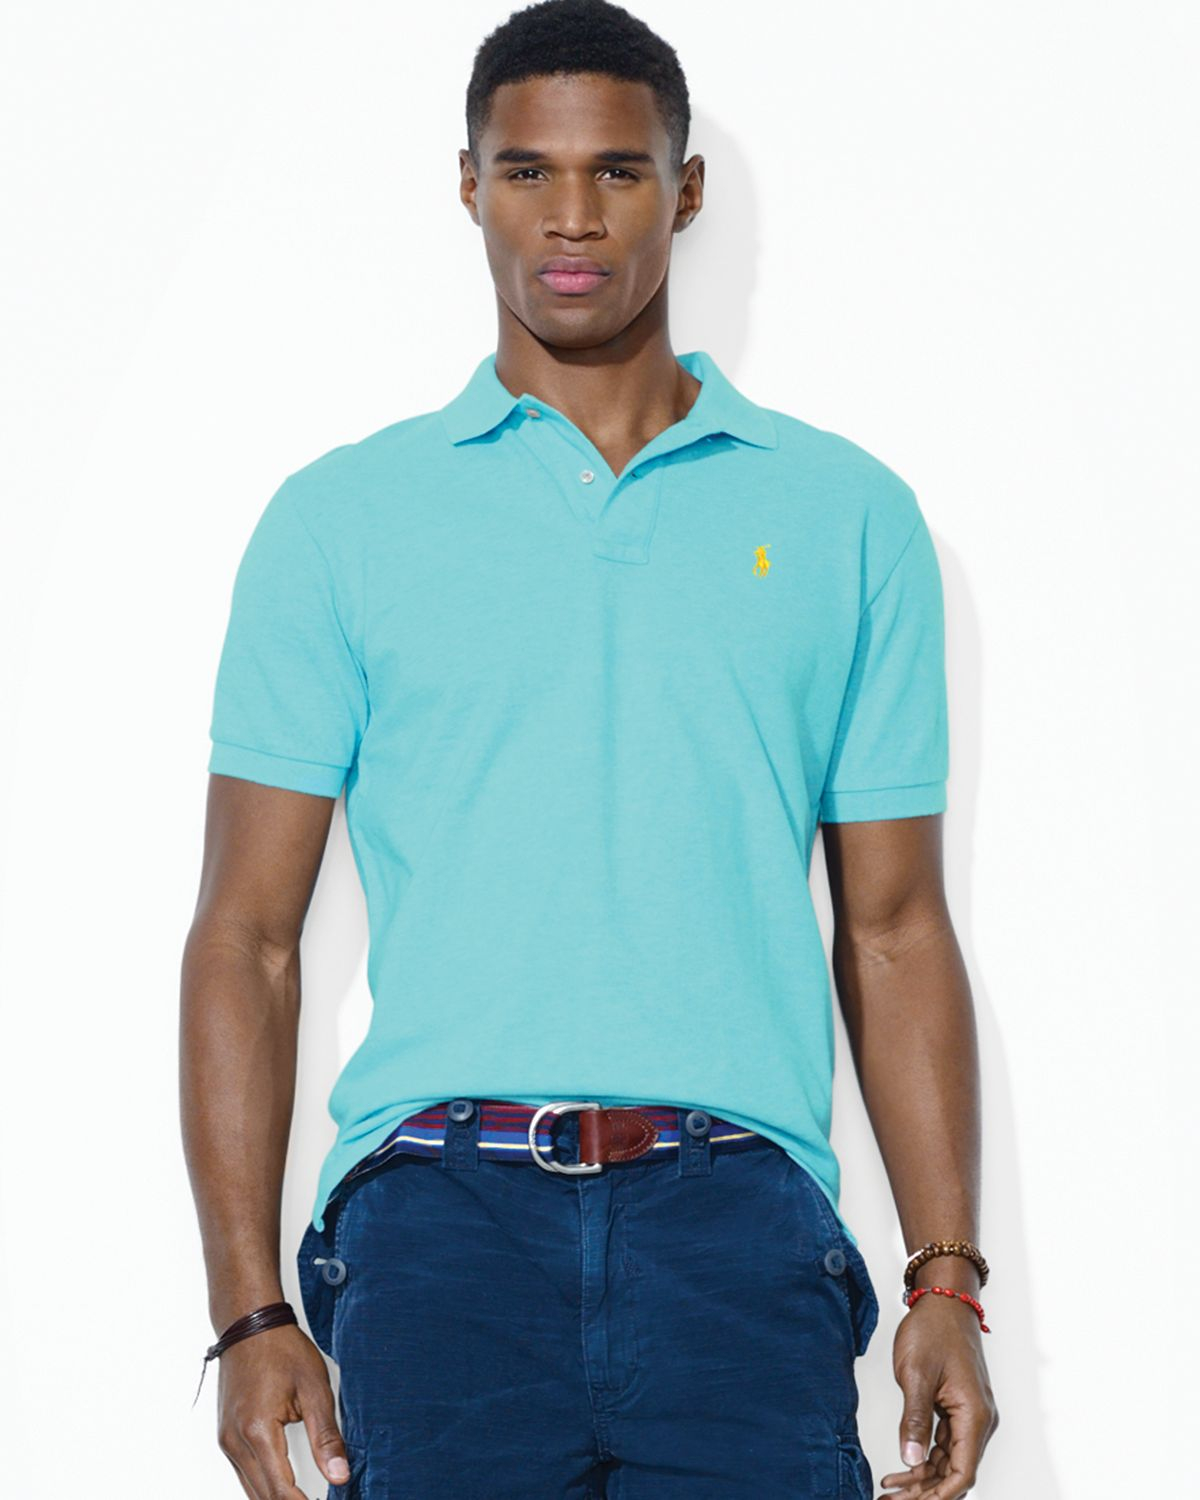 Lyst - Ralph Lauren Polo Classic Fit Mesh Polo Shirt in Blue for Men